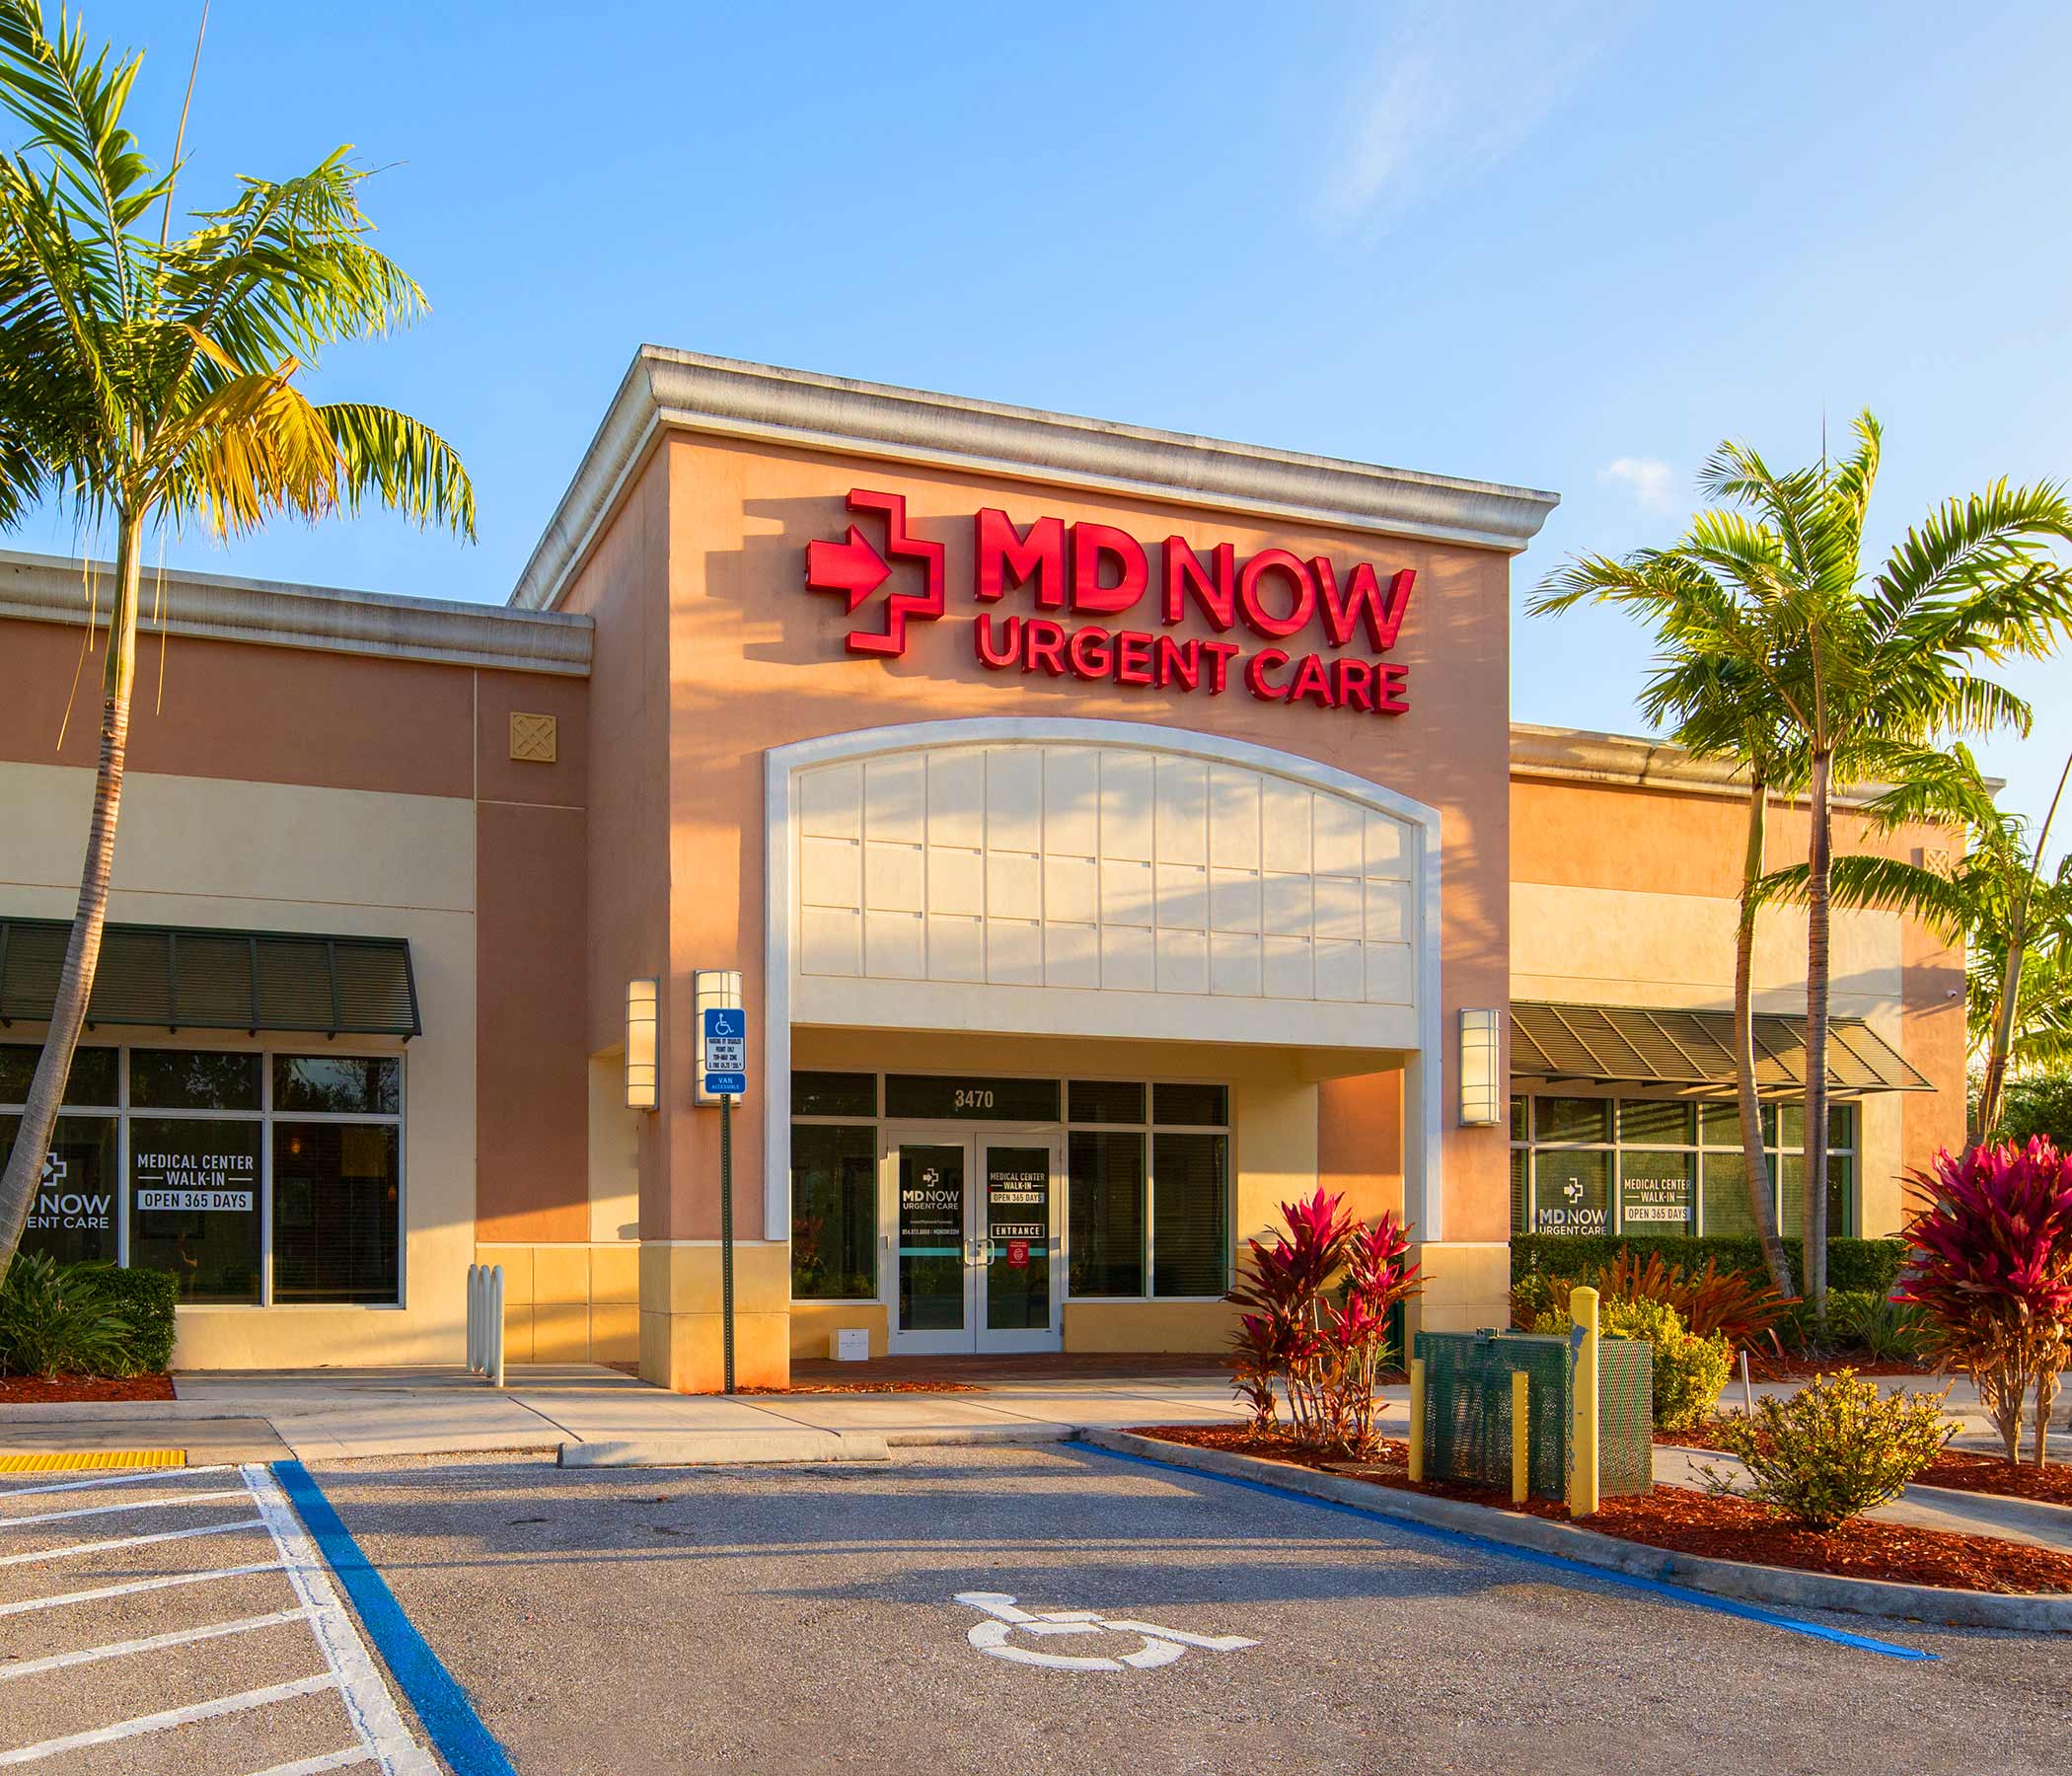 Located at the intersection of NW 62nd Avenue and Bland Road in the Coral Landings III Shopping Mall